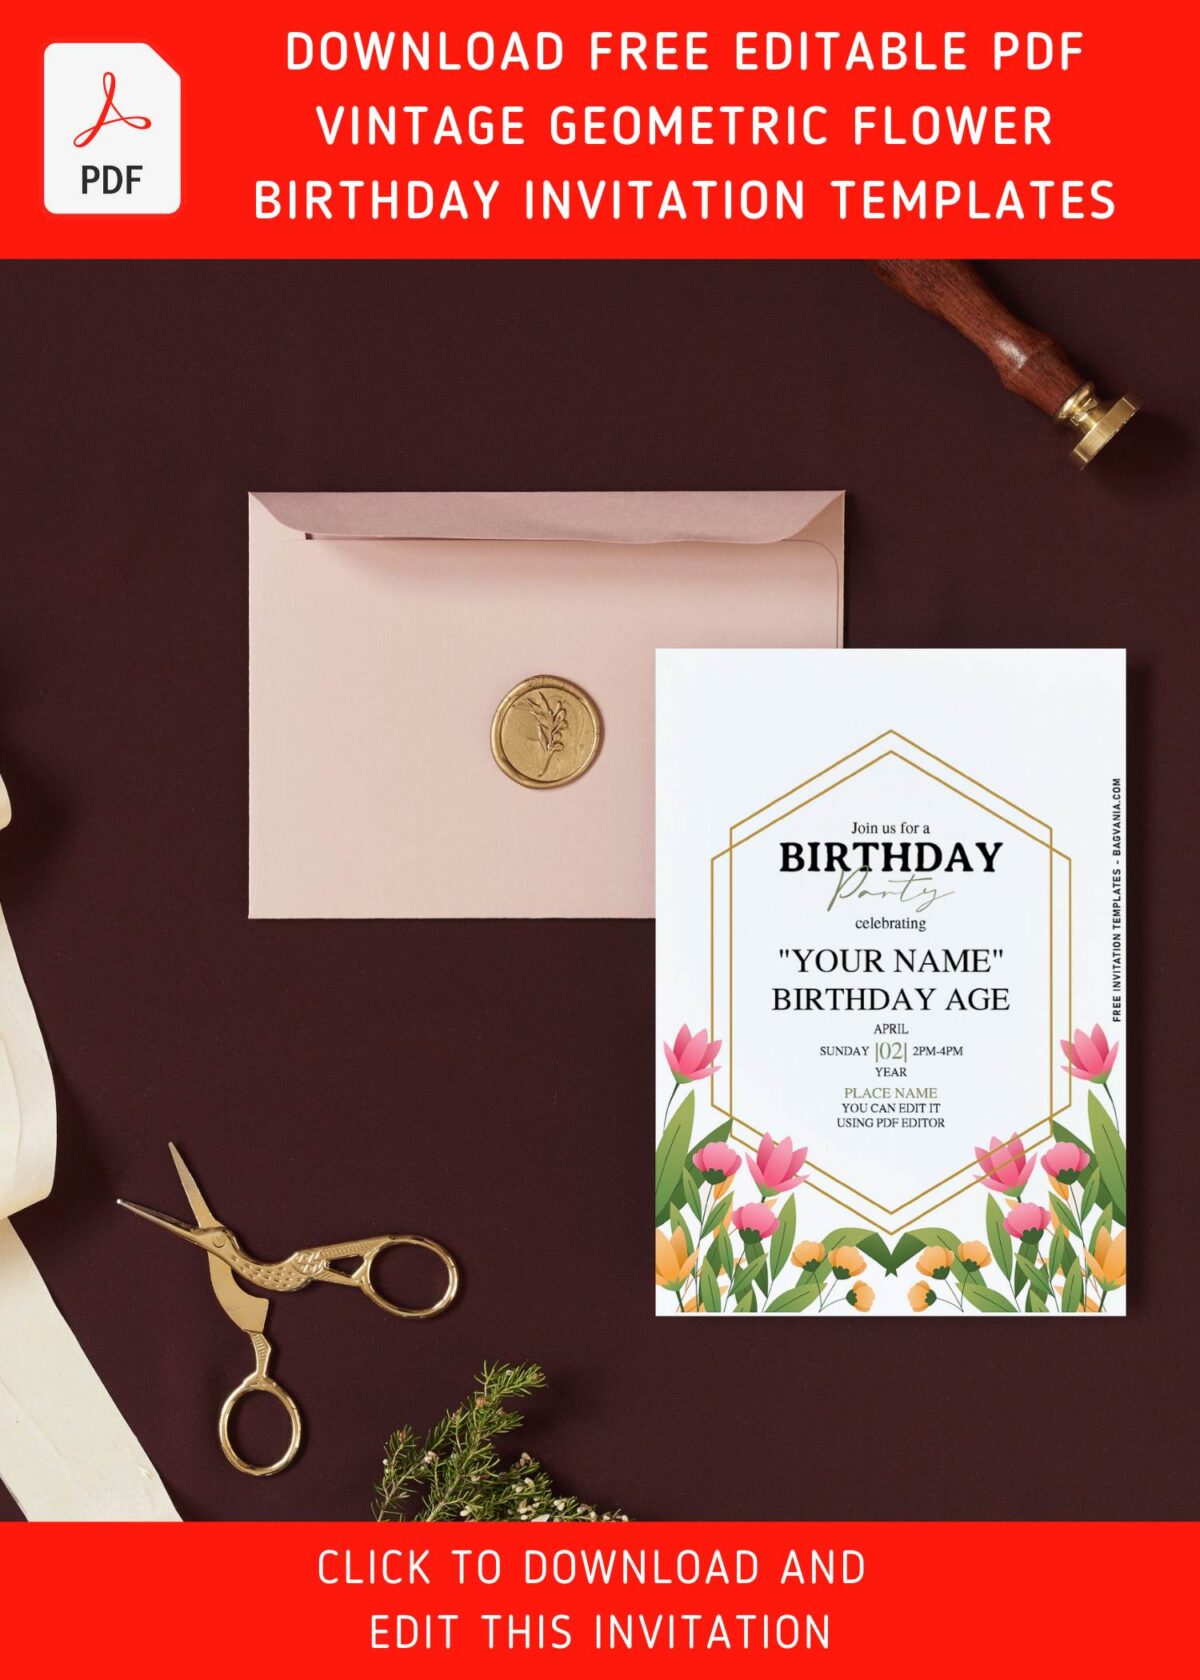 (Free Editable PDF) Geometric Gold And Floral Perfection Birthday Invitation Templates with sparkling gold glitter geometric frame